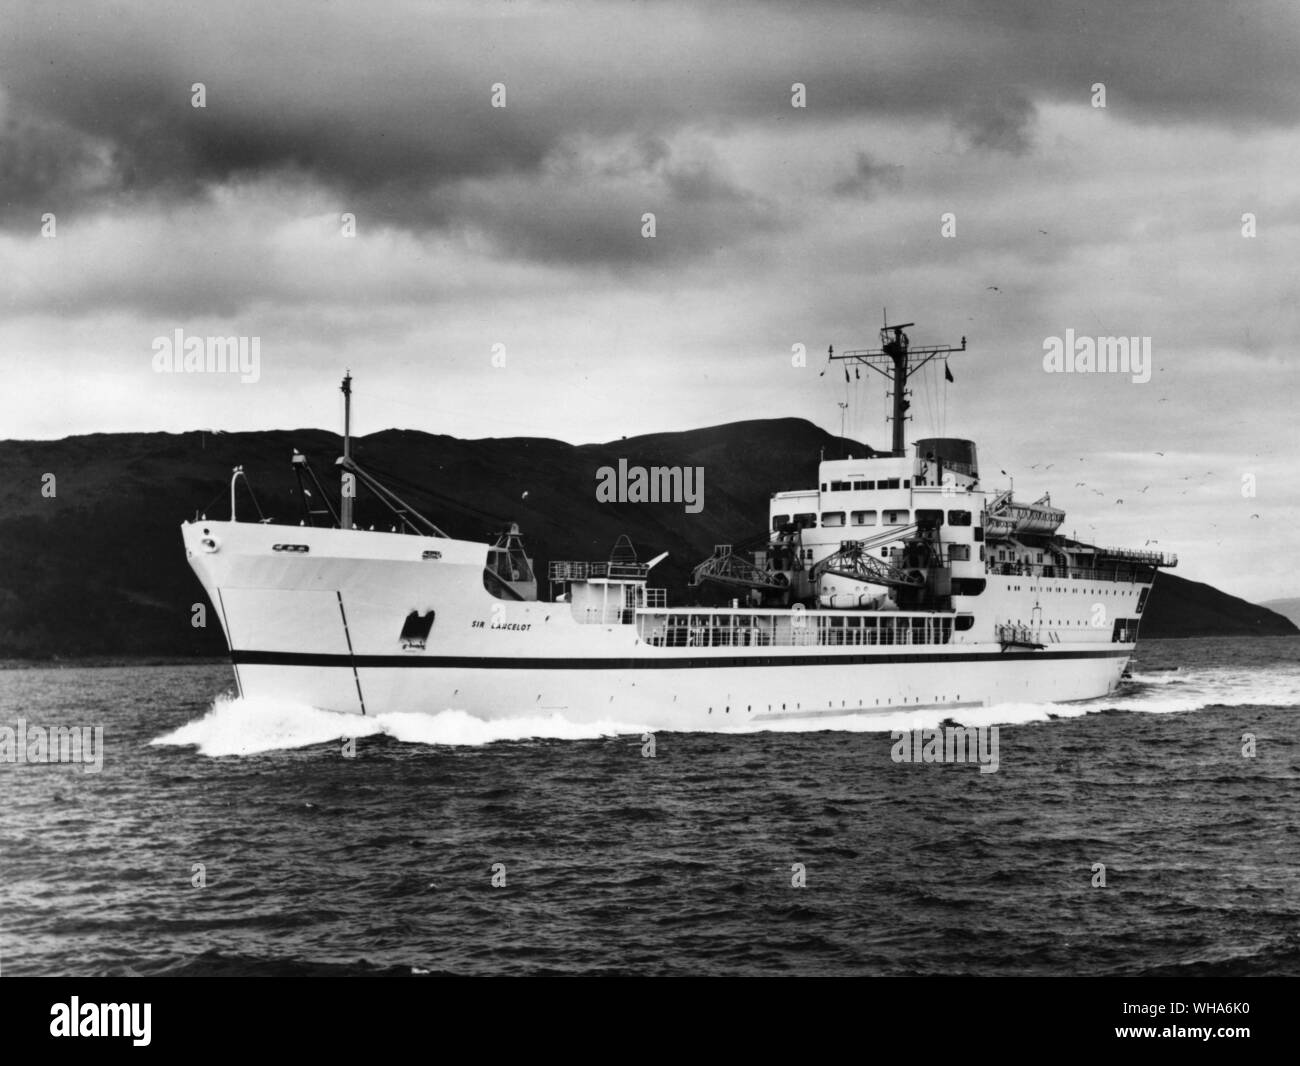 Sir Lancelot pictured during her trials is the Armys first Logistic Ship. designed by the Ministry of Transport to meet the requirements of the War Office for a fast troop and vehicle carrier capable of discharging over a beach.. 1964 Stock Photo